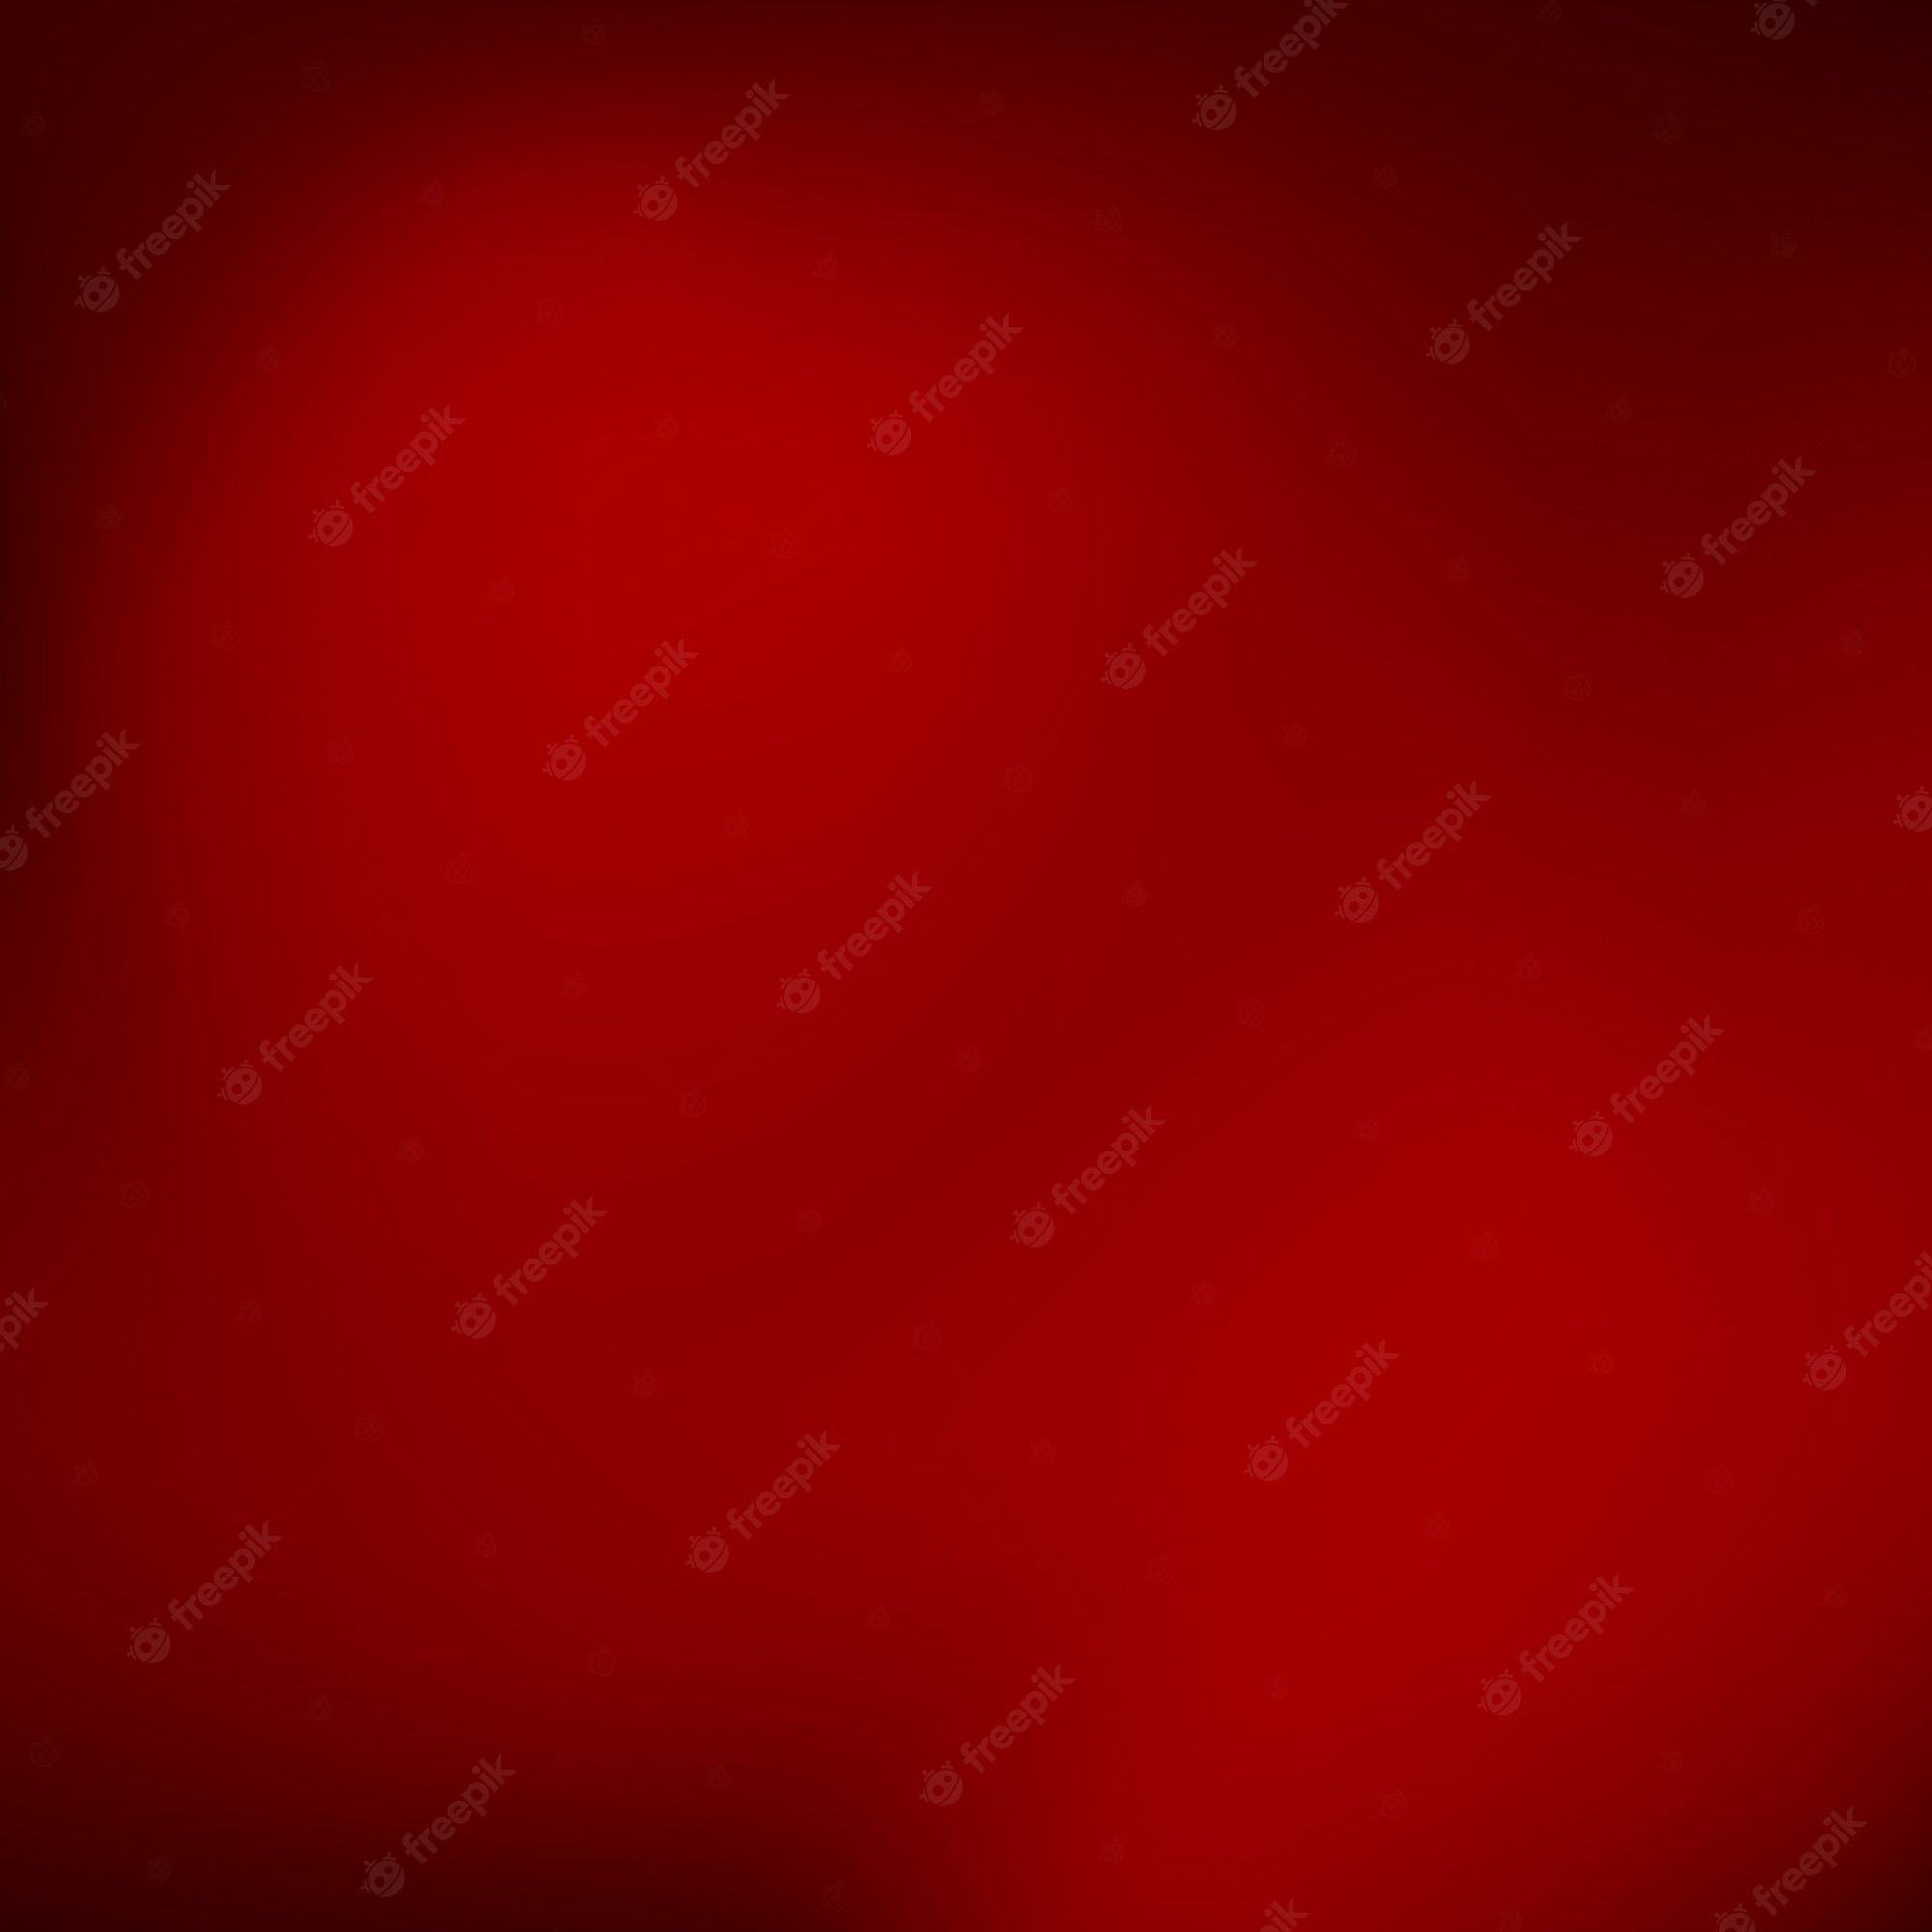 Red background with a black border - Light red